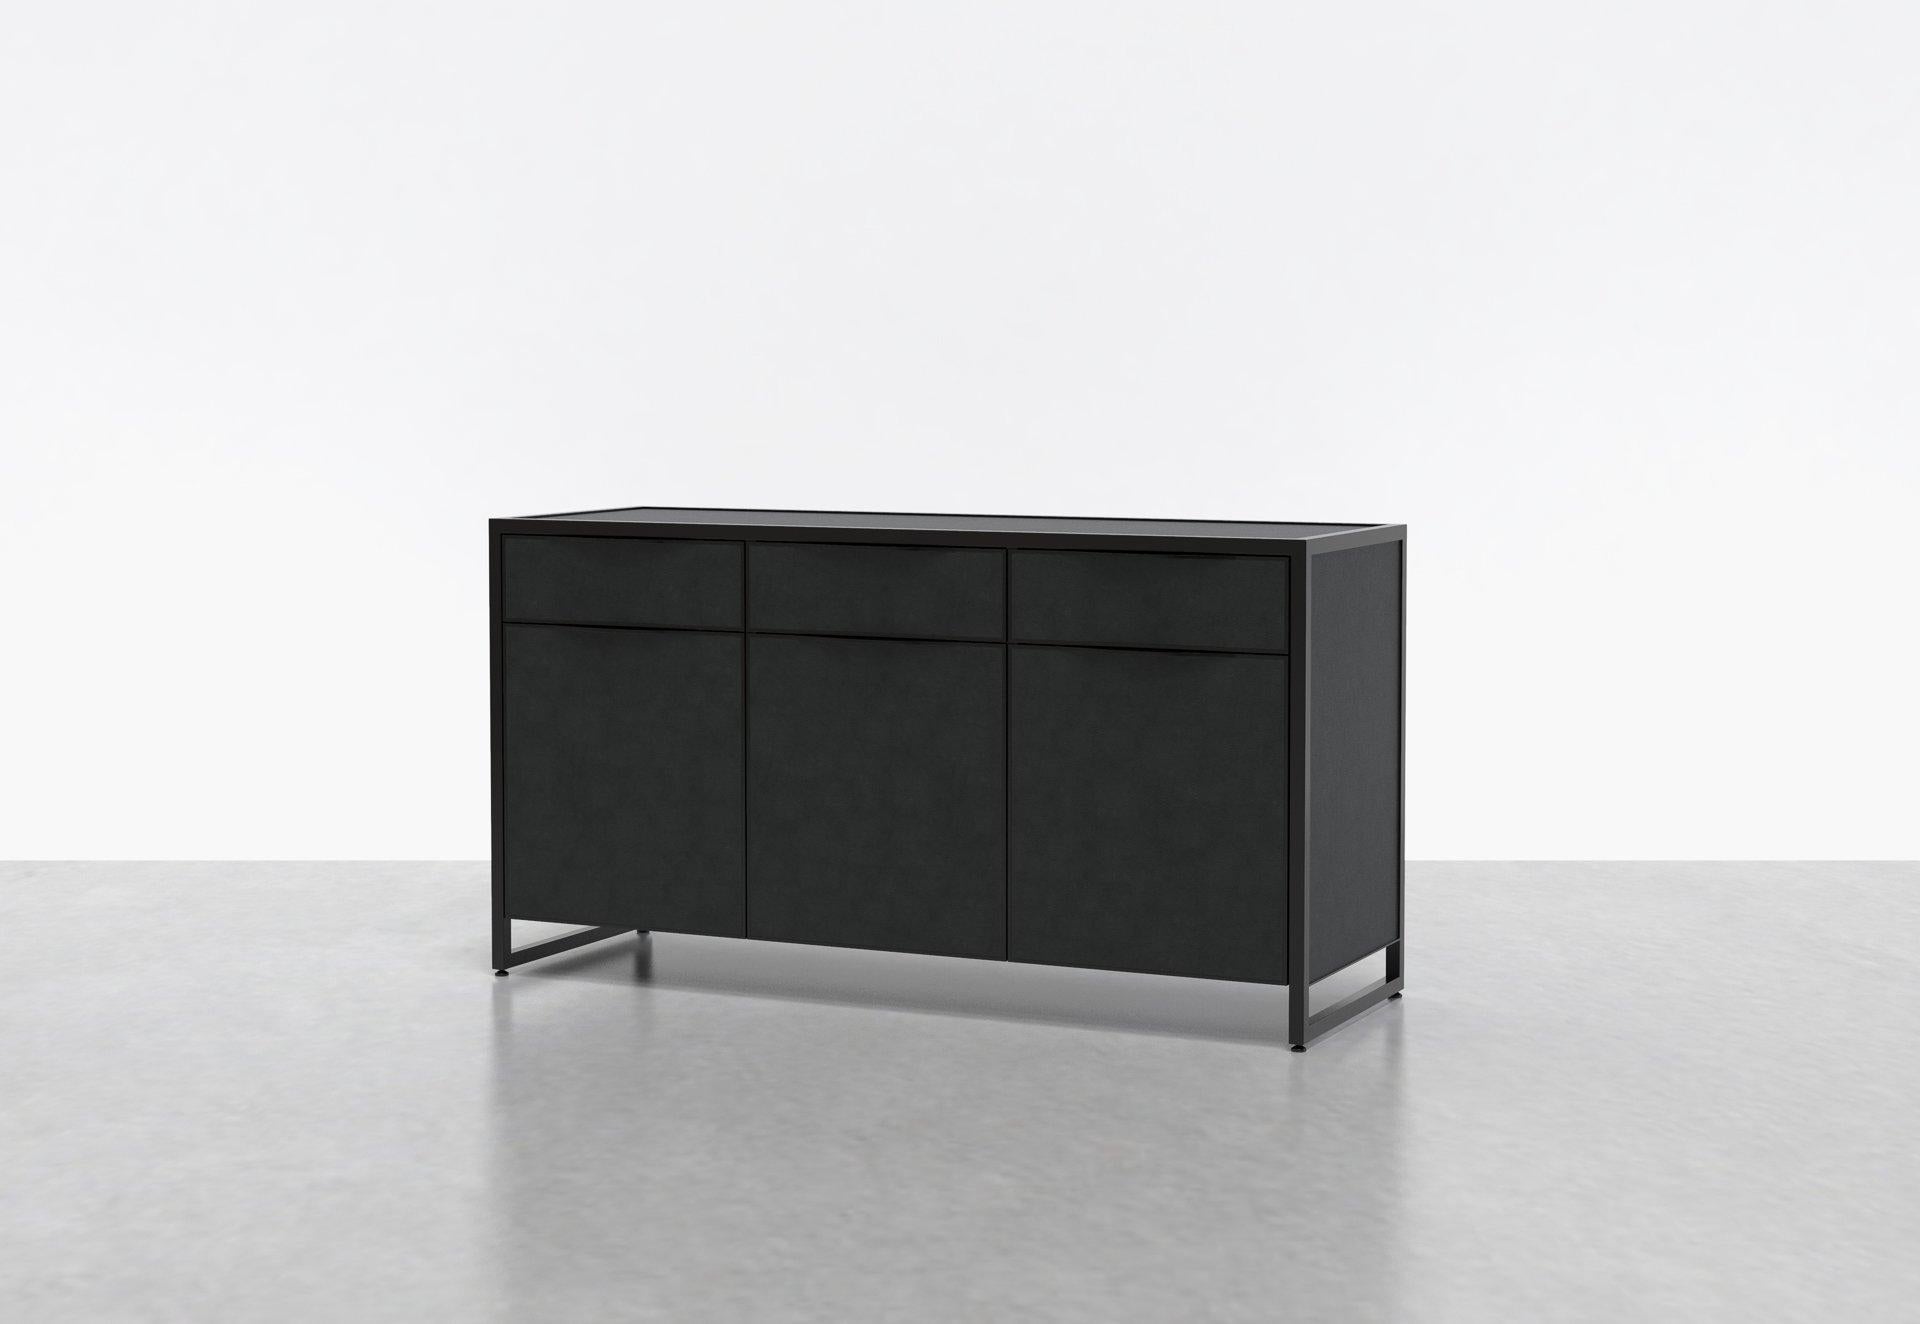 Two of our favorite materials, leather and steel, come together in the Cairns Credenza. This luxe console or media unit combines leather-clad surfaces with a steel frame. Four drawers sit above four doors that conceal adjustable shelves, providing